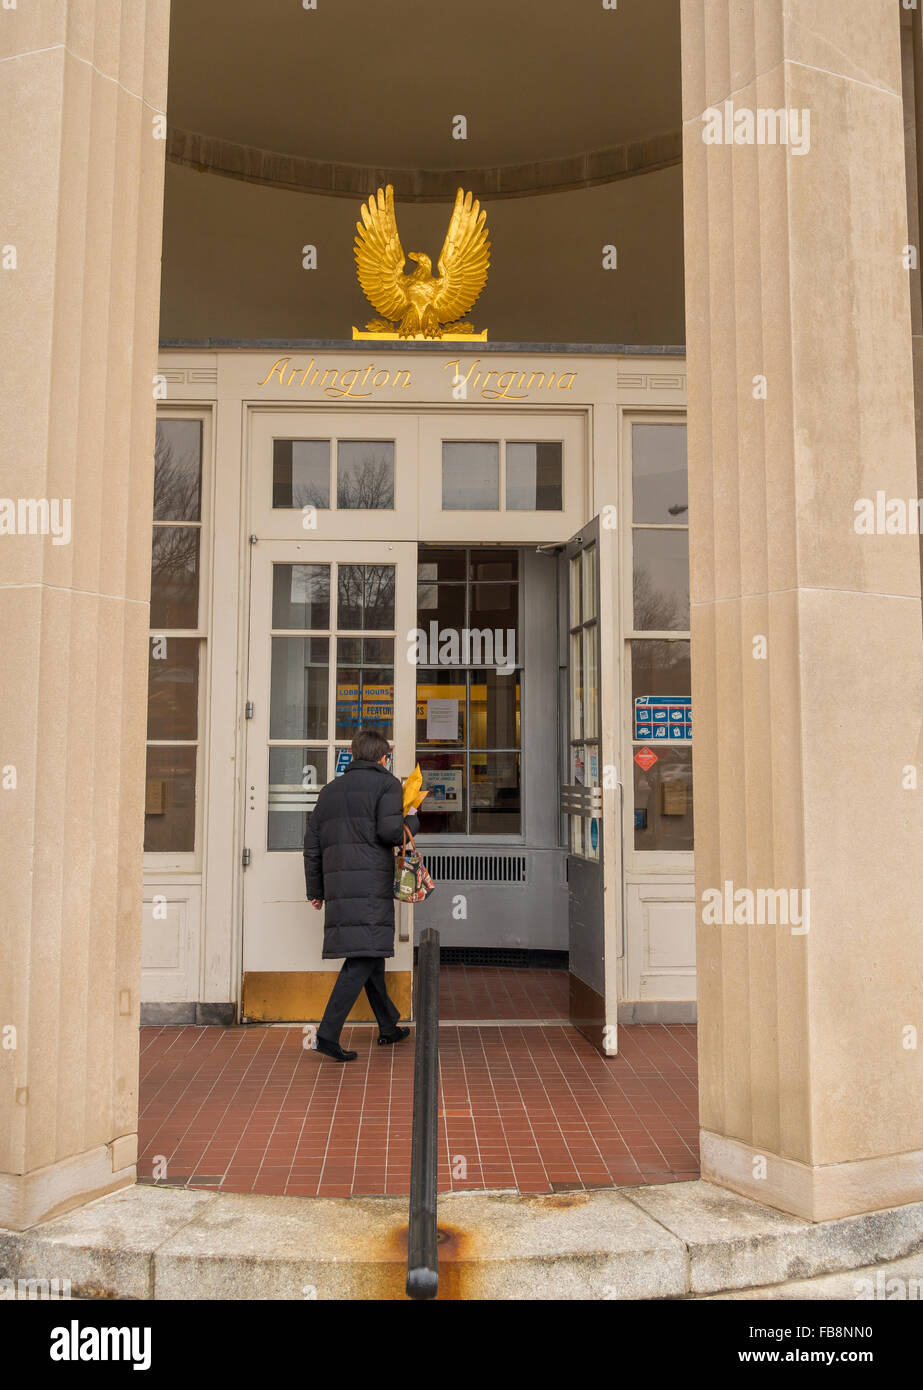 ARLINGTON, VIRGINIA, USA - Woman entering U.S. Post Office, and gold leaf eagle and name over door. in Clarendon neighborhood. Stock Photo